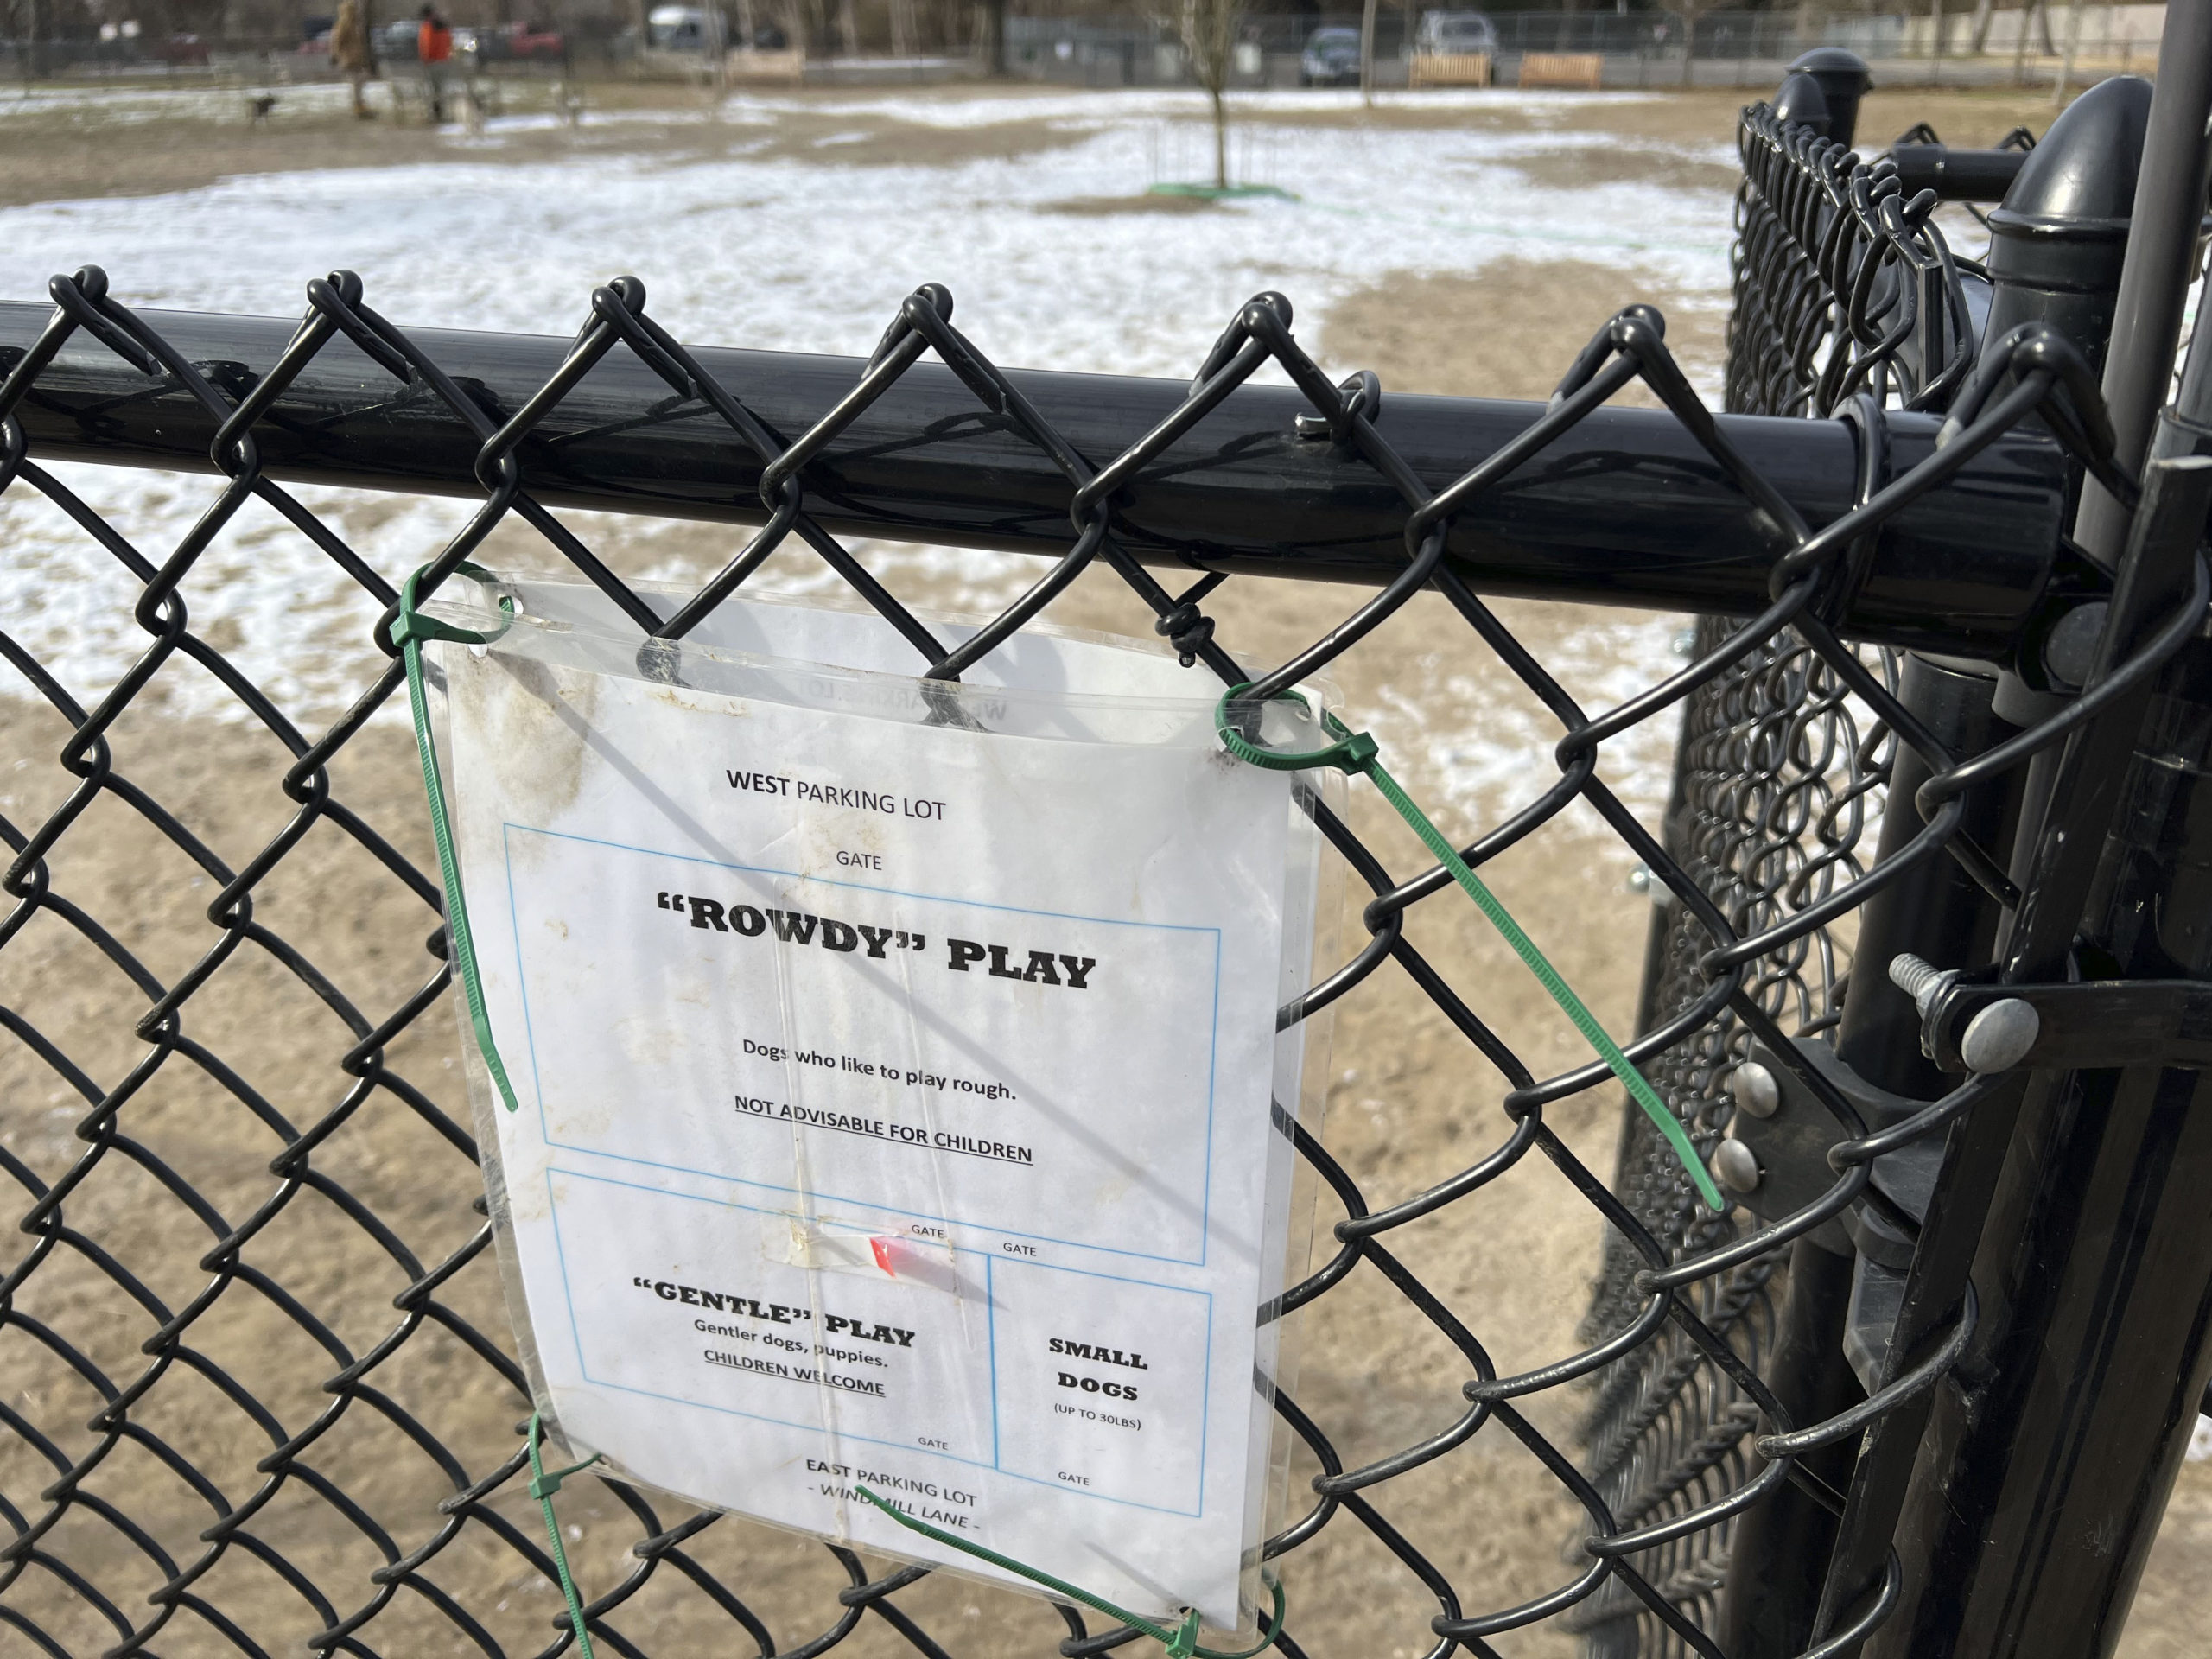 The Southampton Village Dog Park is divided into 3 separate areas: 